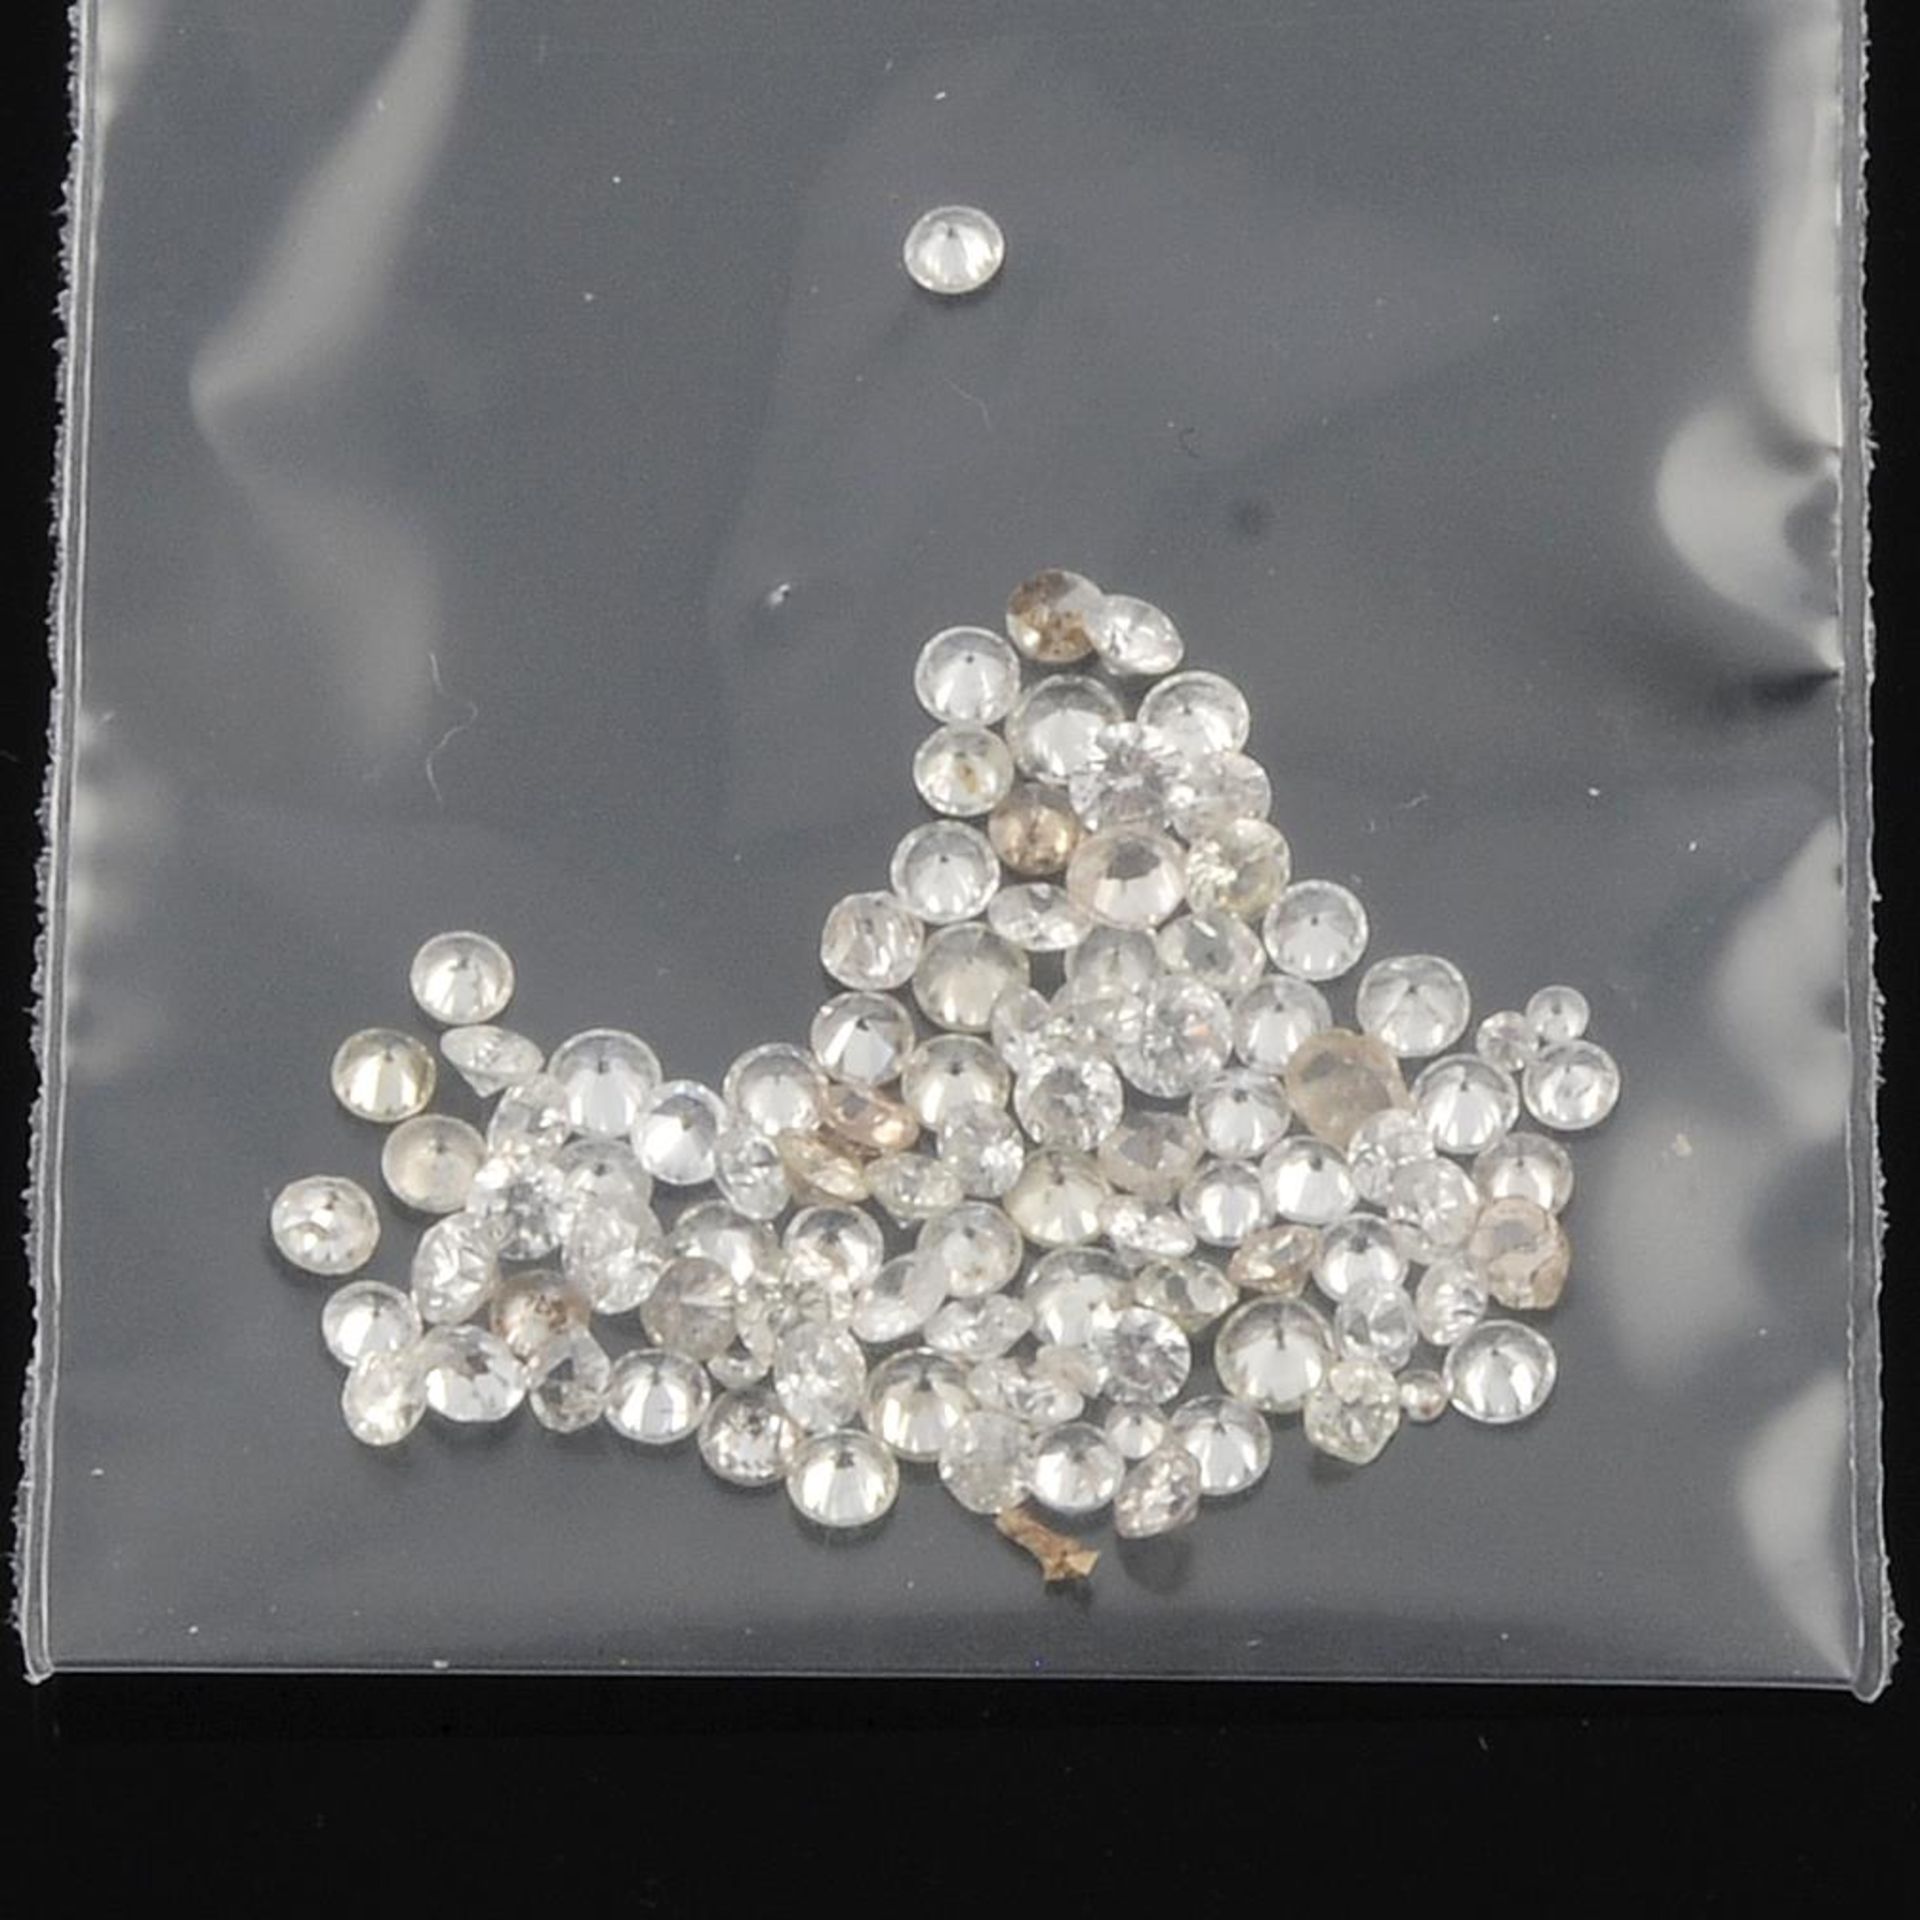 Selection of brilliant cut diamonds, weighing 4.13ct. - Image 2 of 3